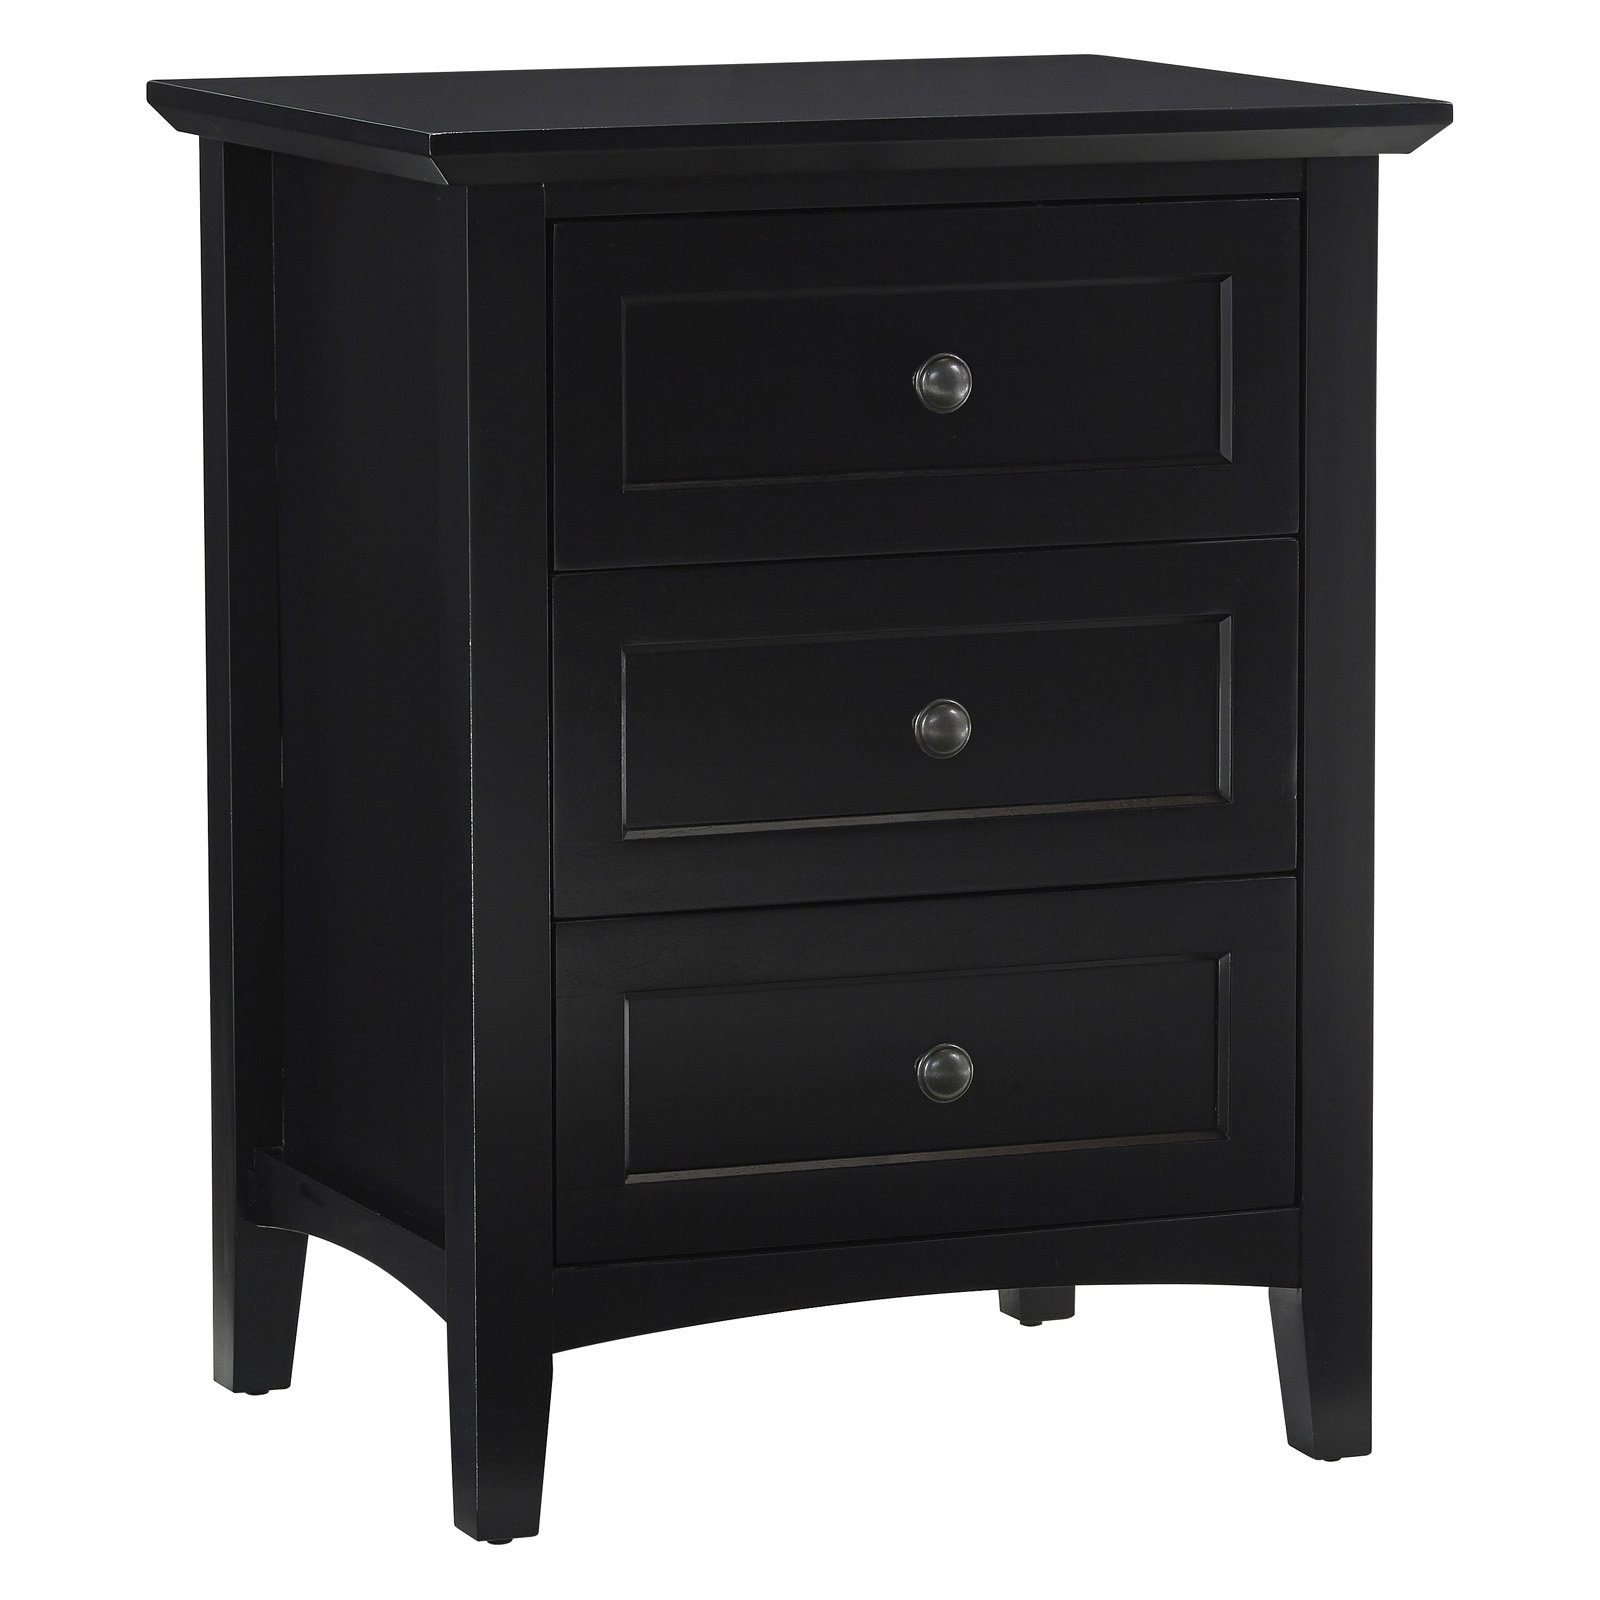 Modus Paragon 3 Drawer Nightstand in Black - image 3 of 7